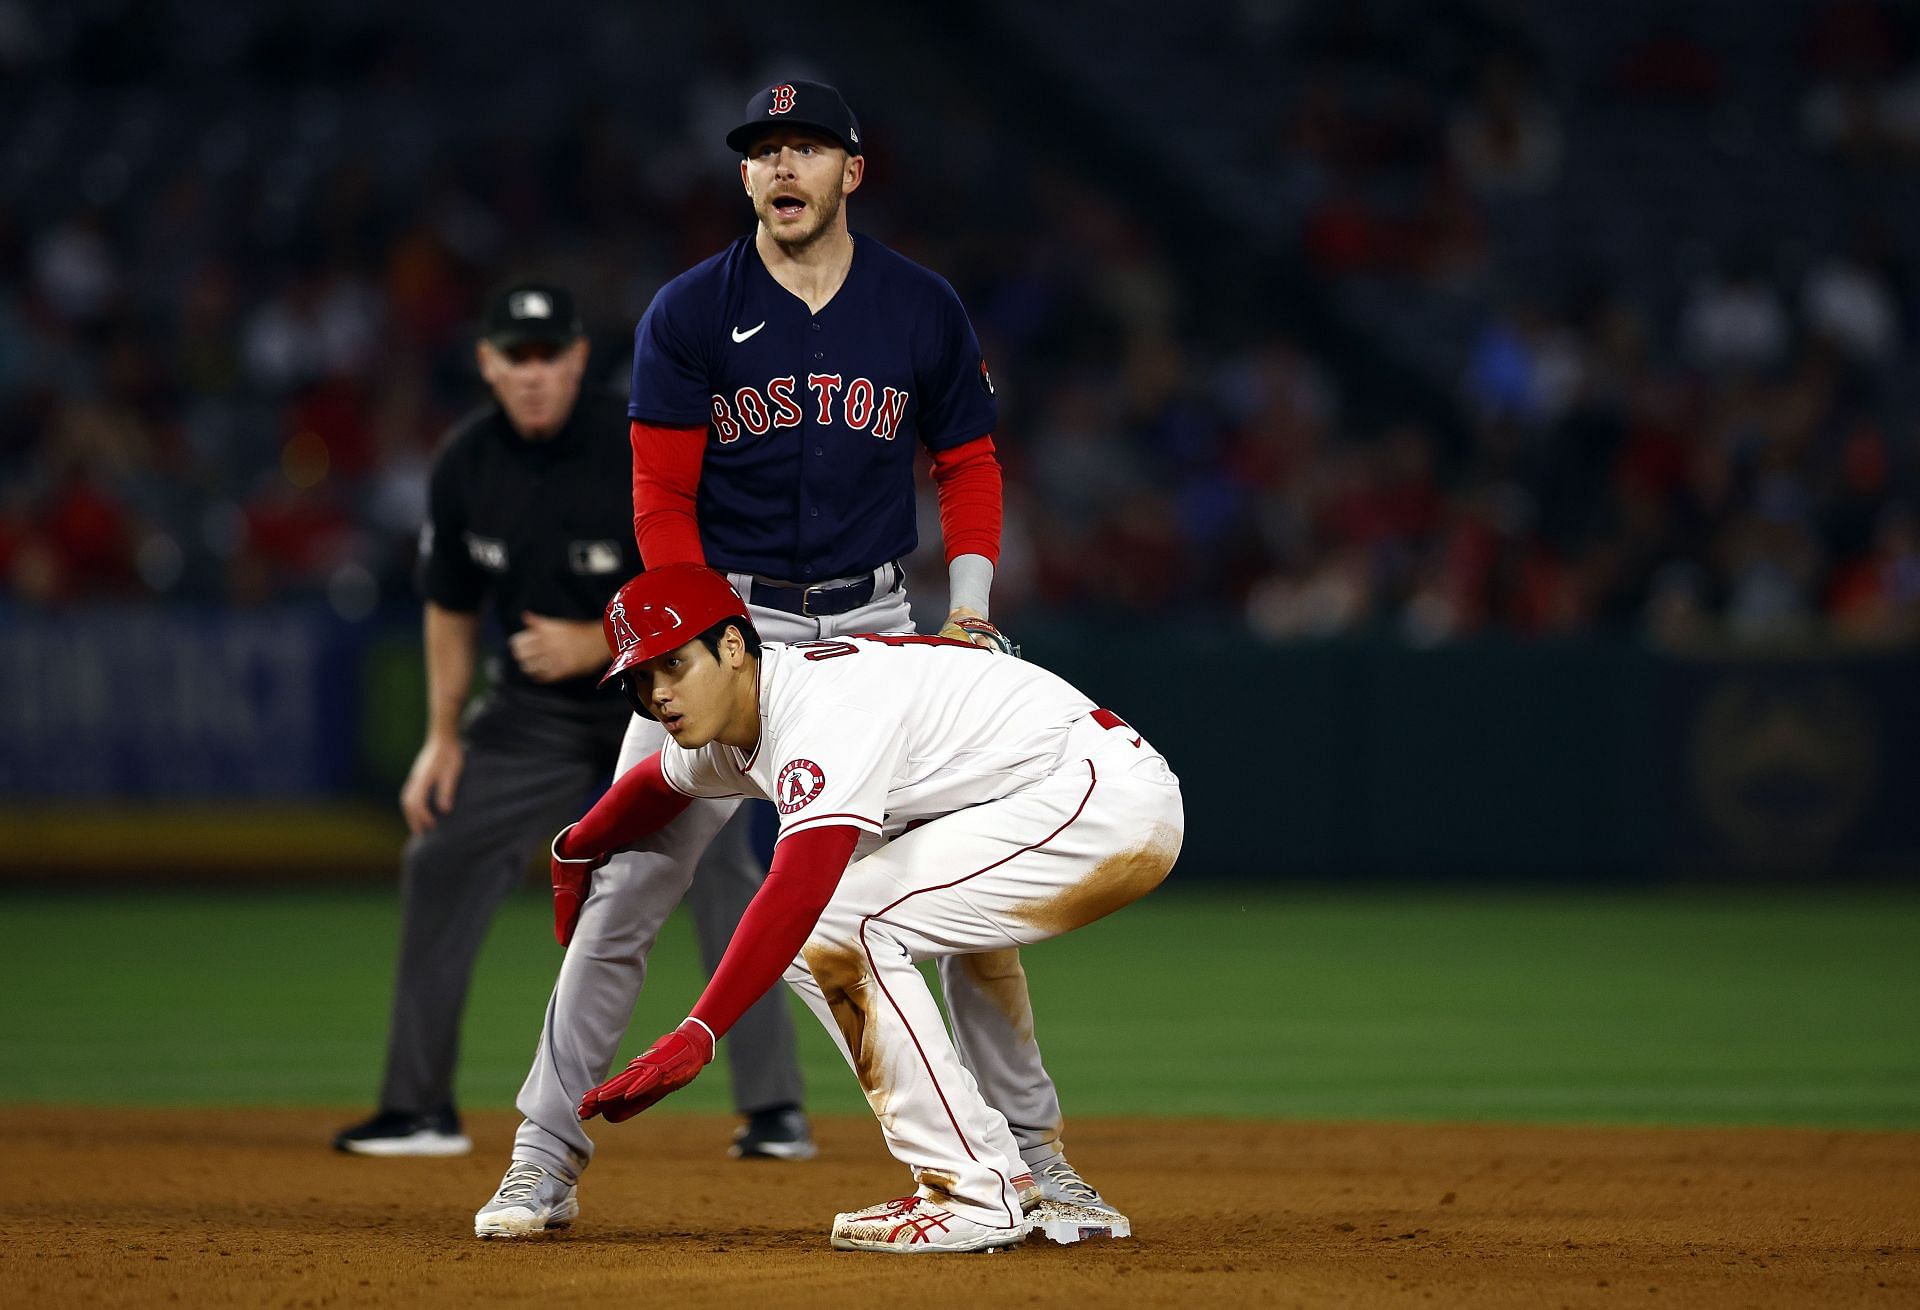 Luis Urías comes to the Boston Red Sox as the trade deadline concludes, Locked On Red Sox